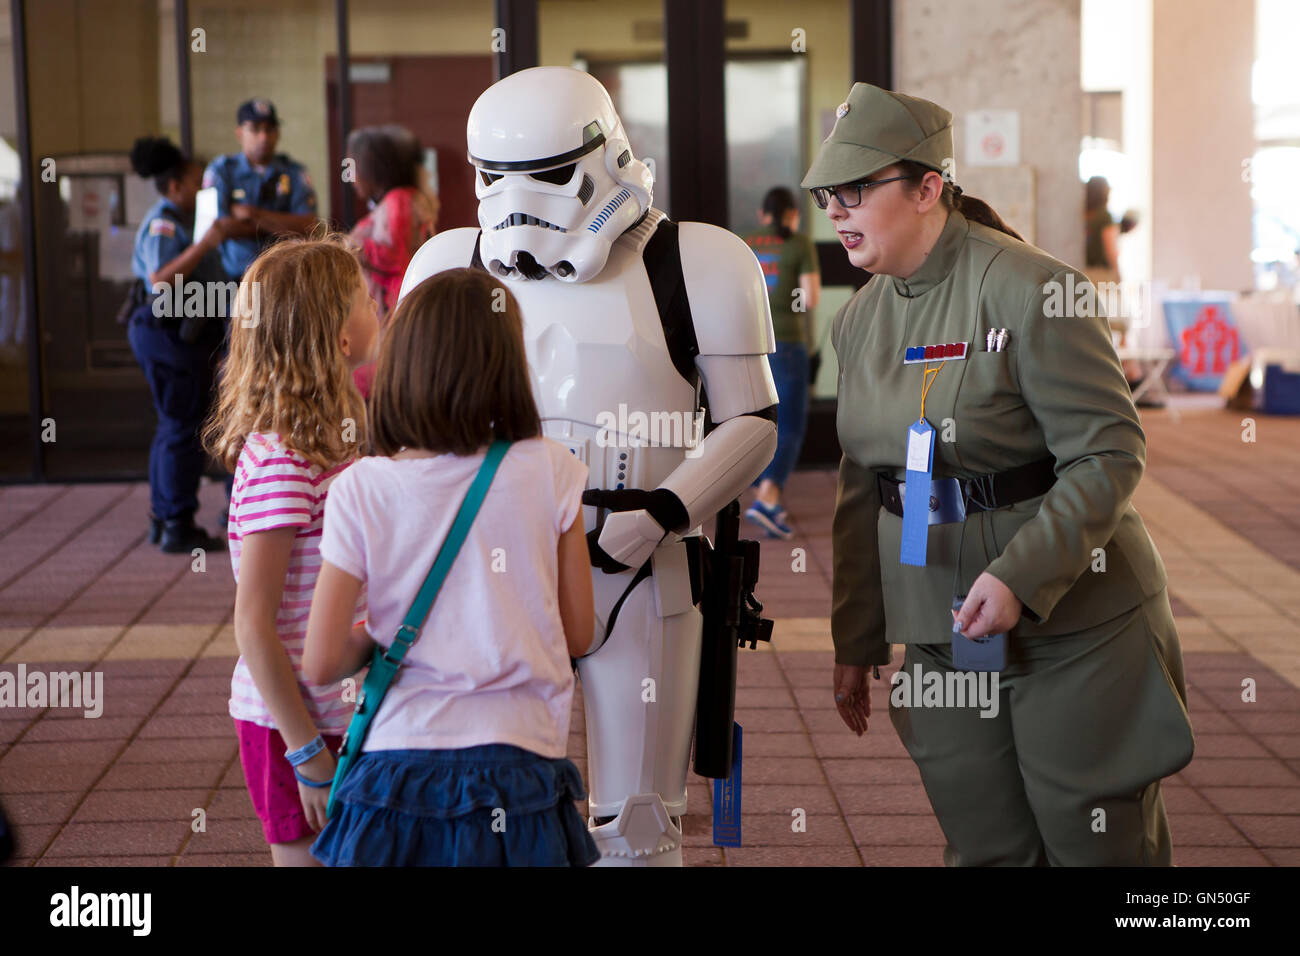 Imperial Officer High Resolution Stock Photography and Images - Alamy